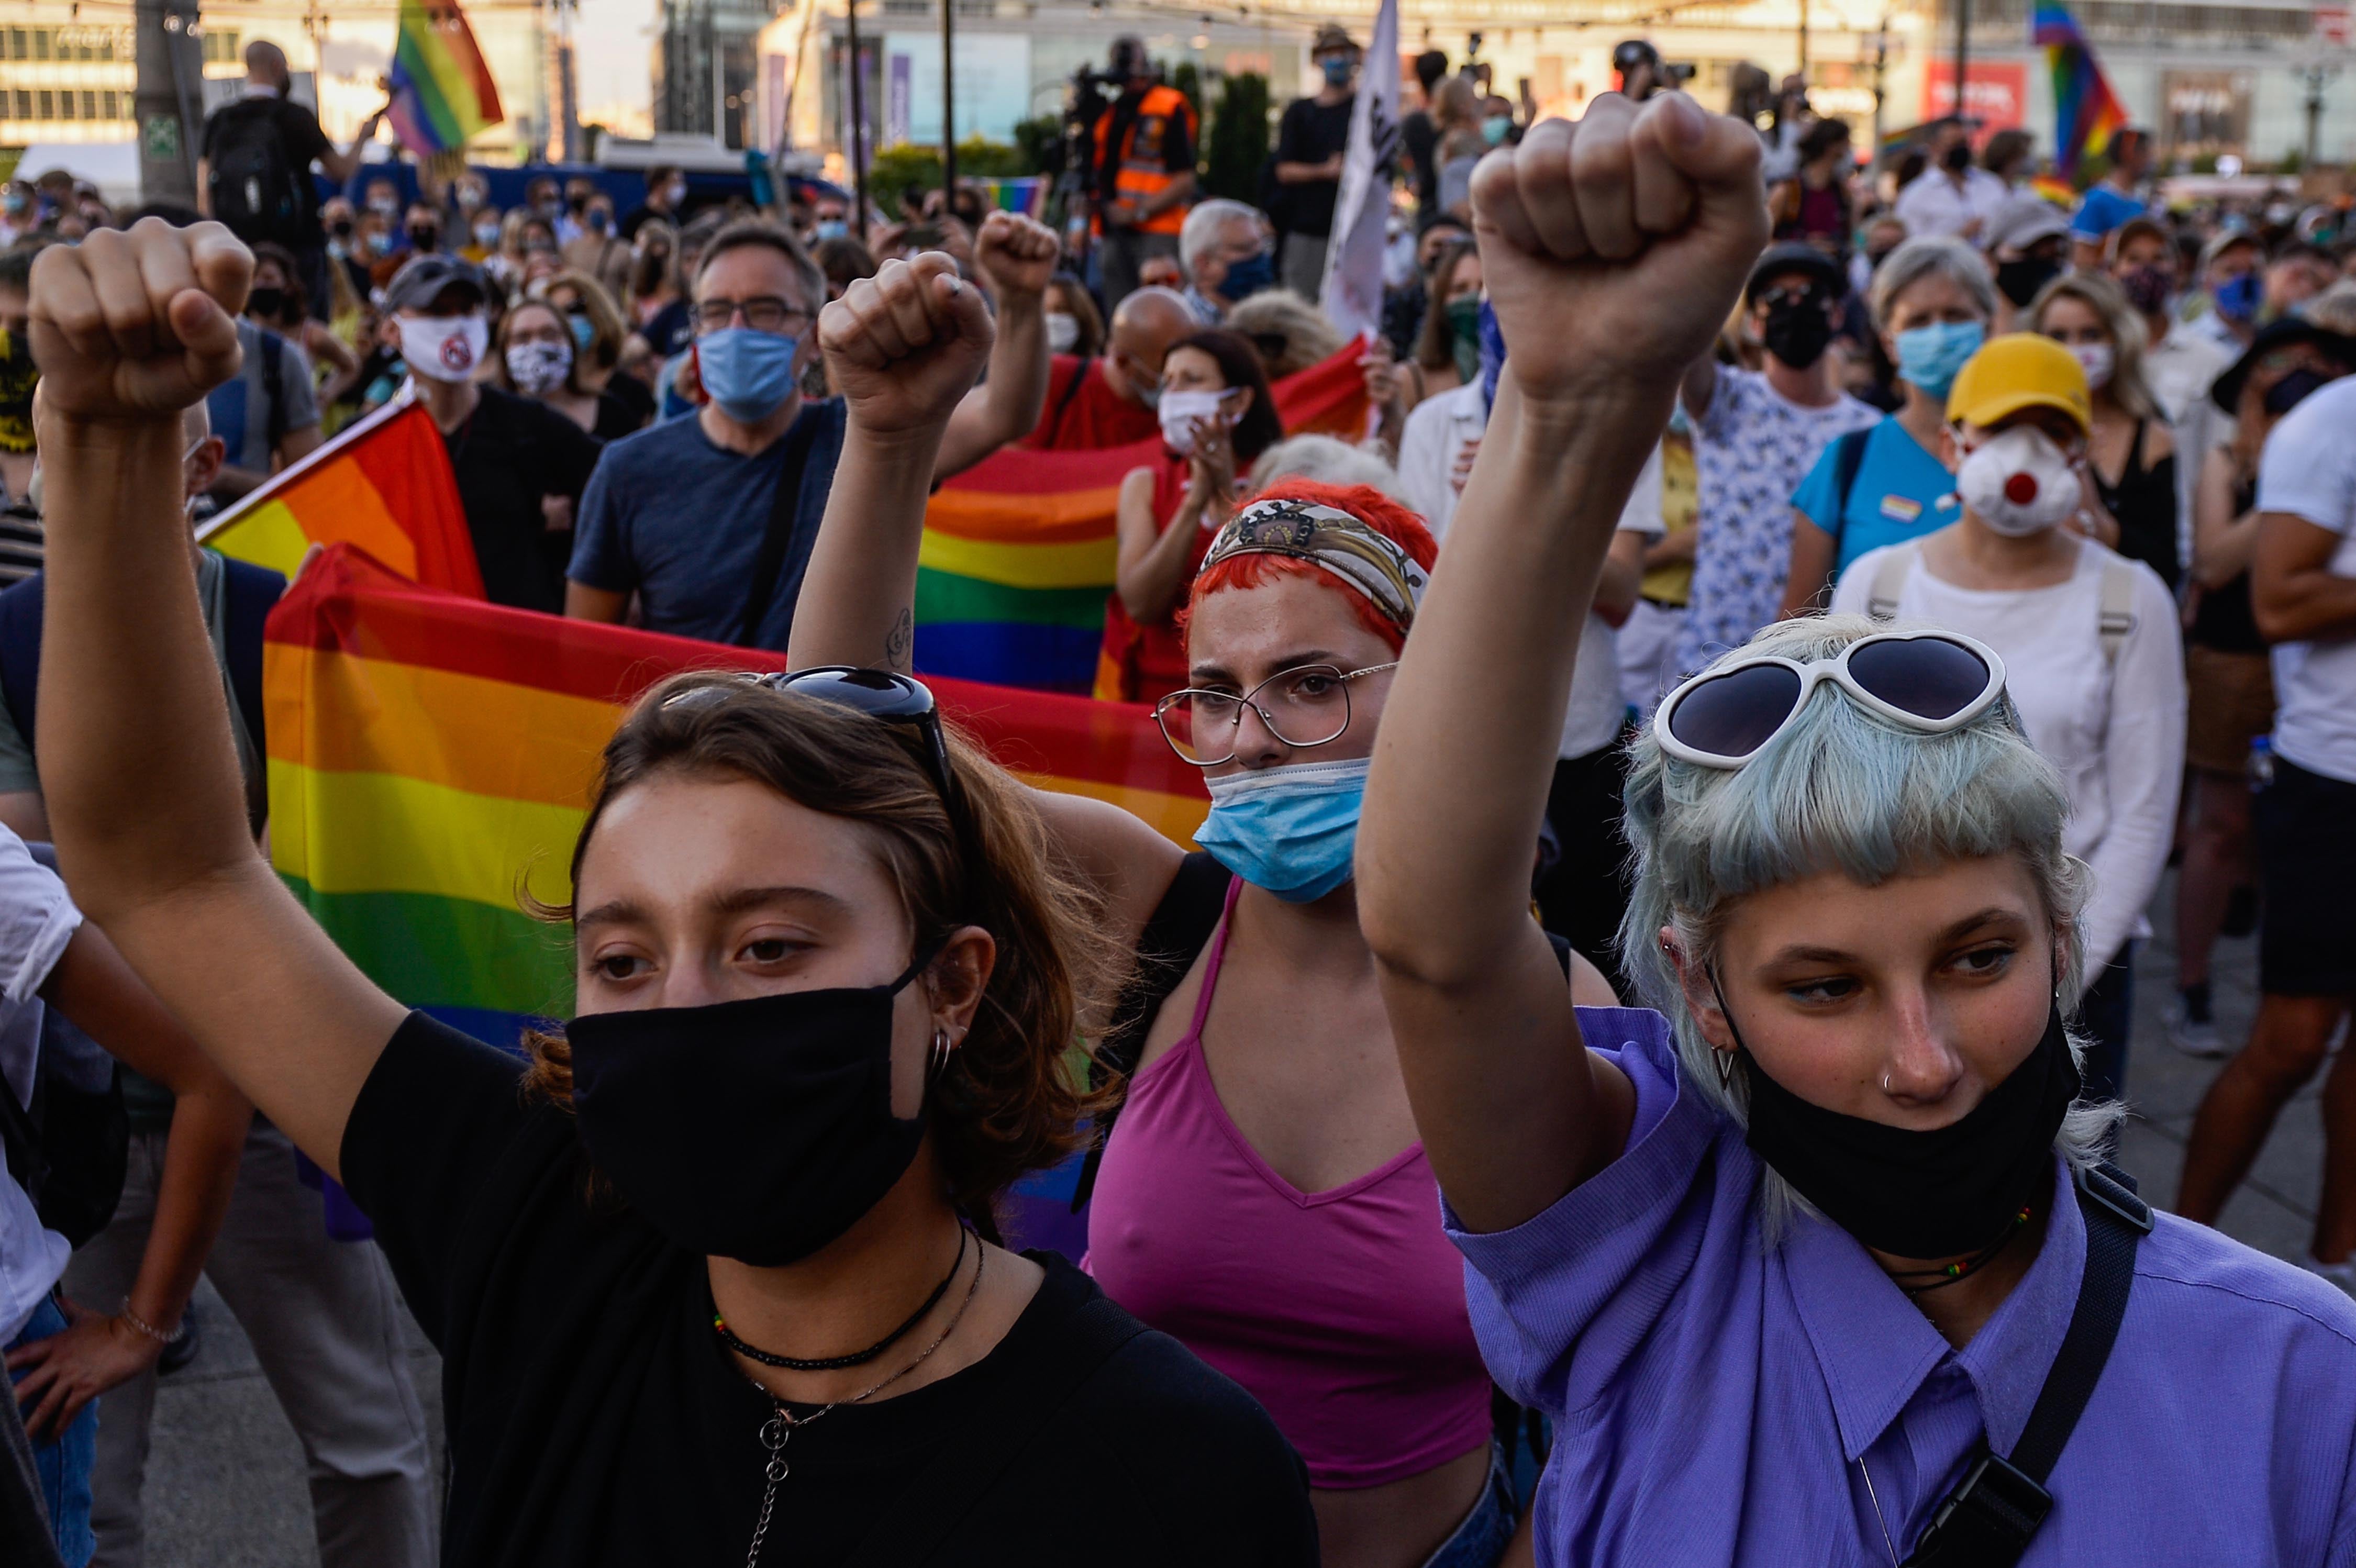 Demonstrators during a protest against the detention of an LGBT activist on August 08, 2020 in Warsaw, Poland.